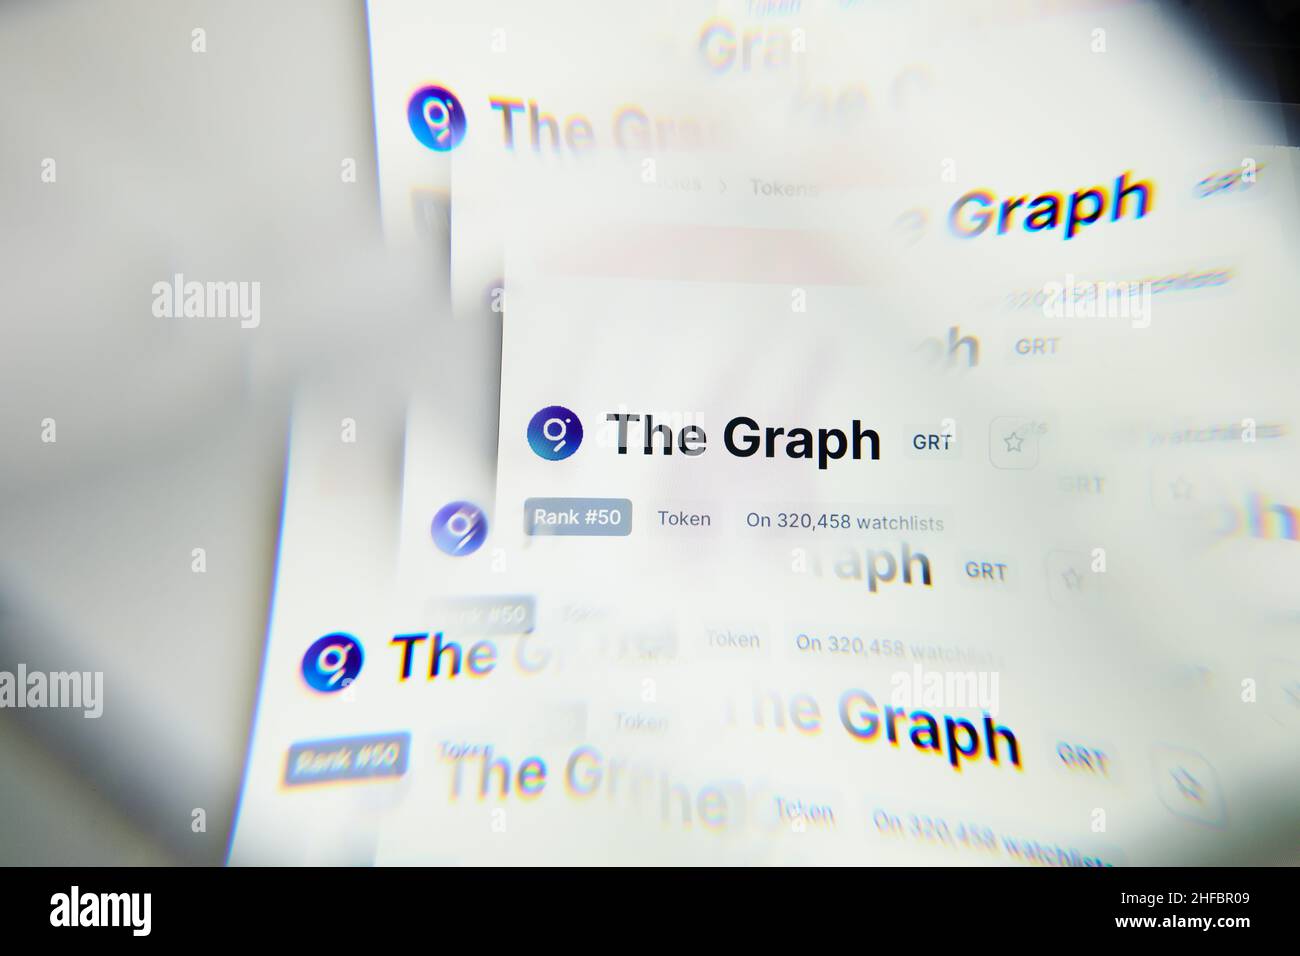 Milan, Italy - January 11, 2022: the graph - GRT logo on laptop screen seen through an optical prism. Dynamic and unique image form the graph, GRT coi Stock Photo